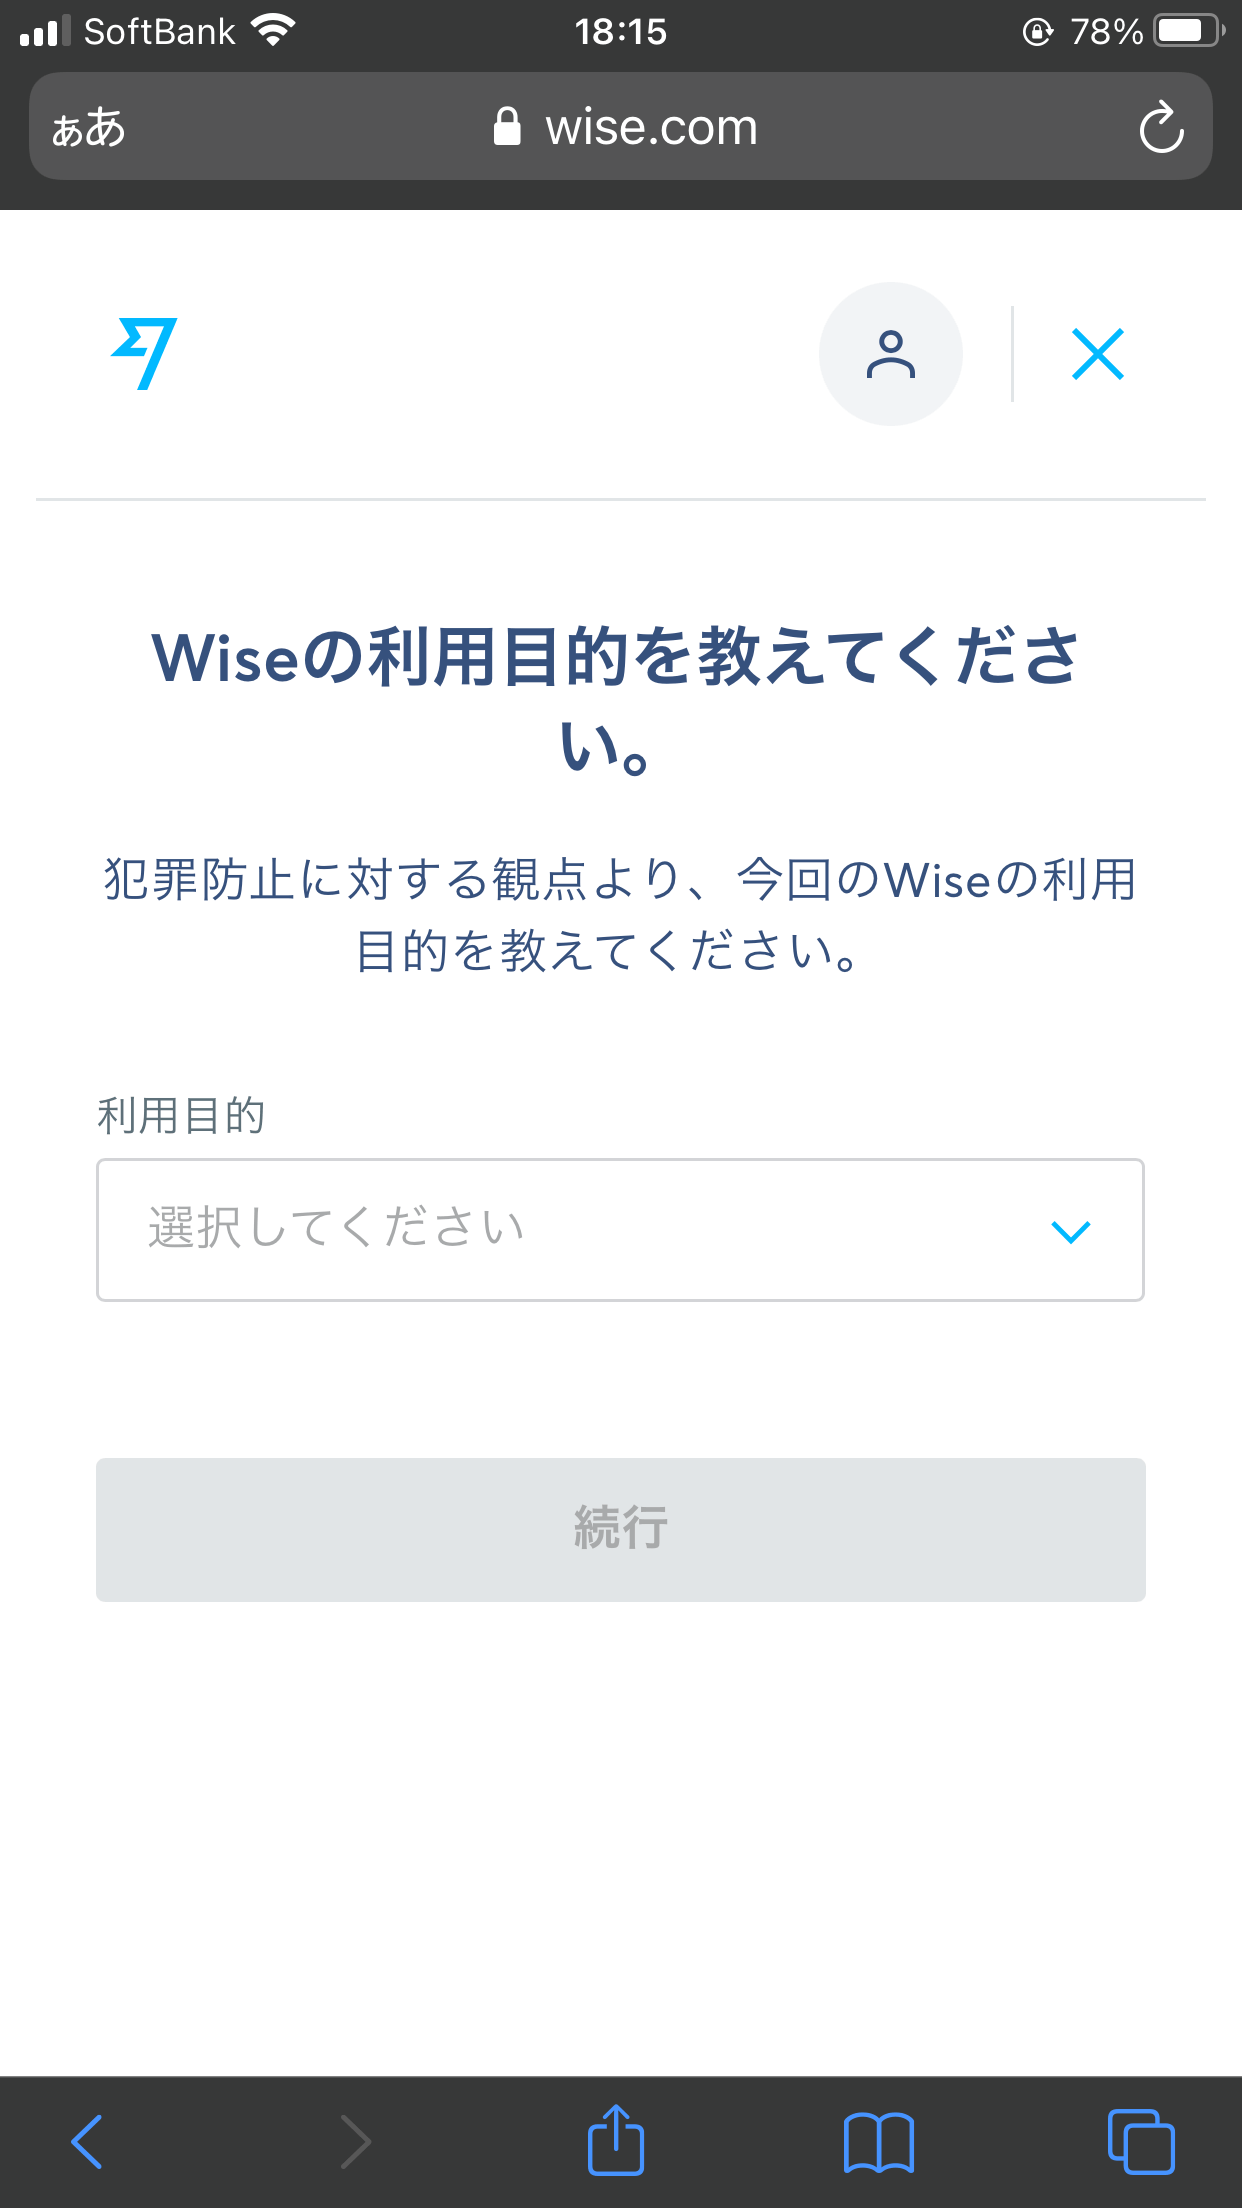 Wise：利用目的を選択